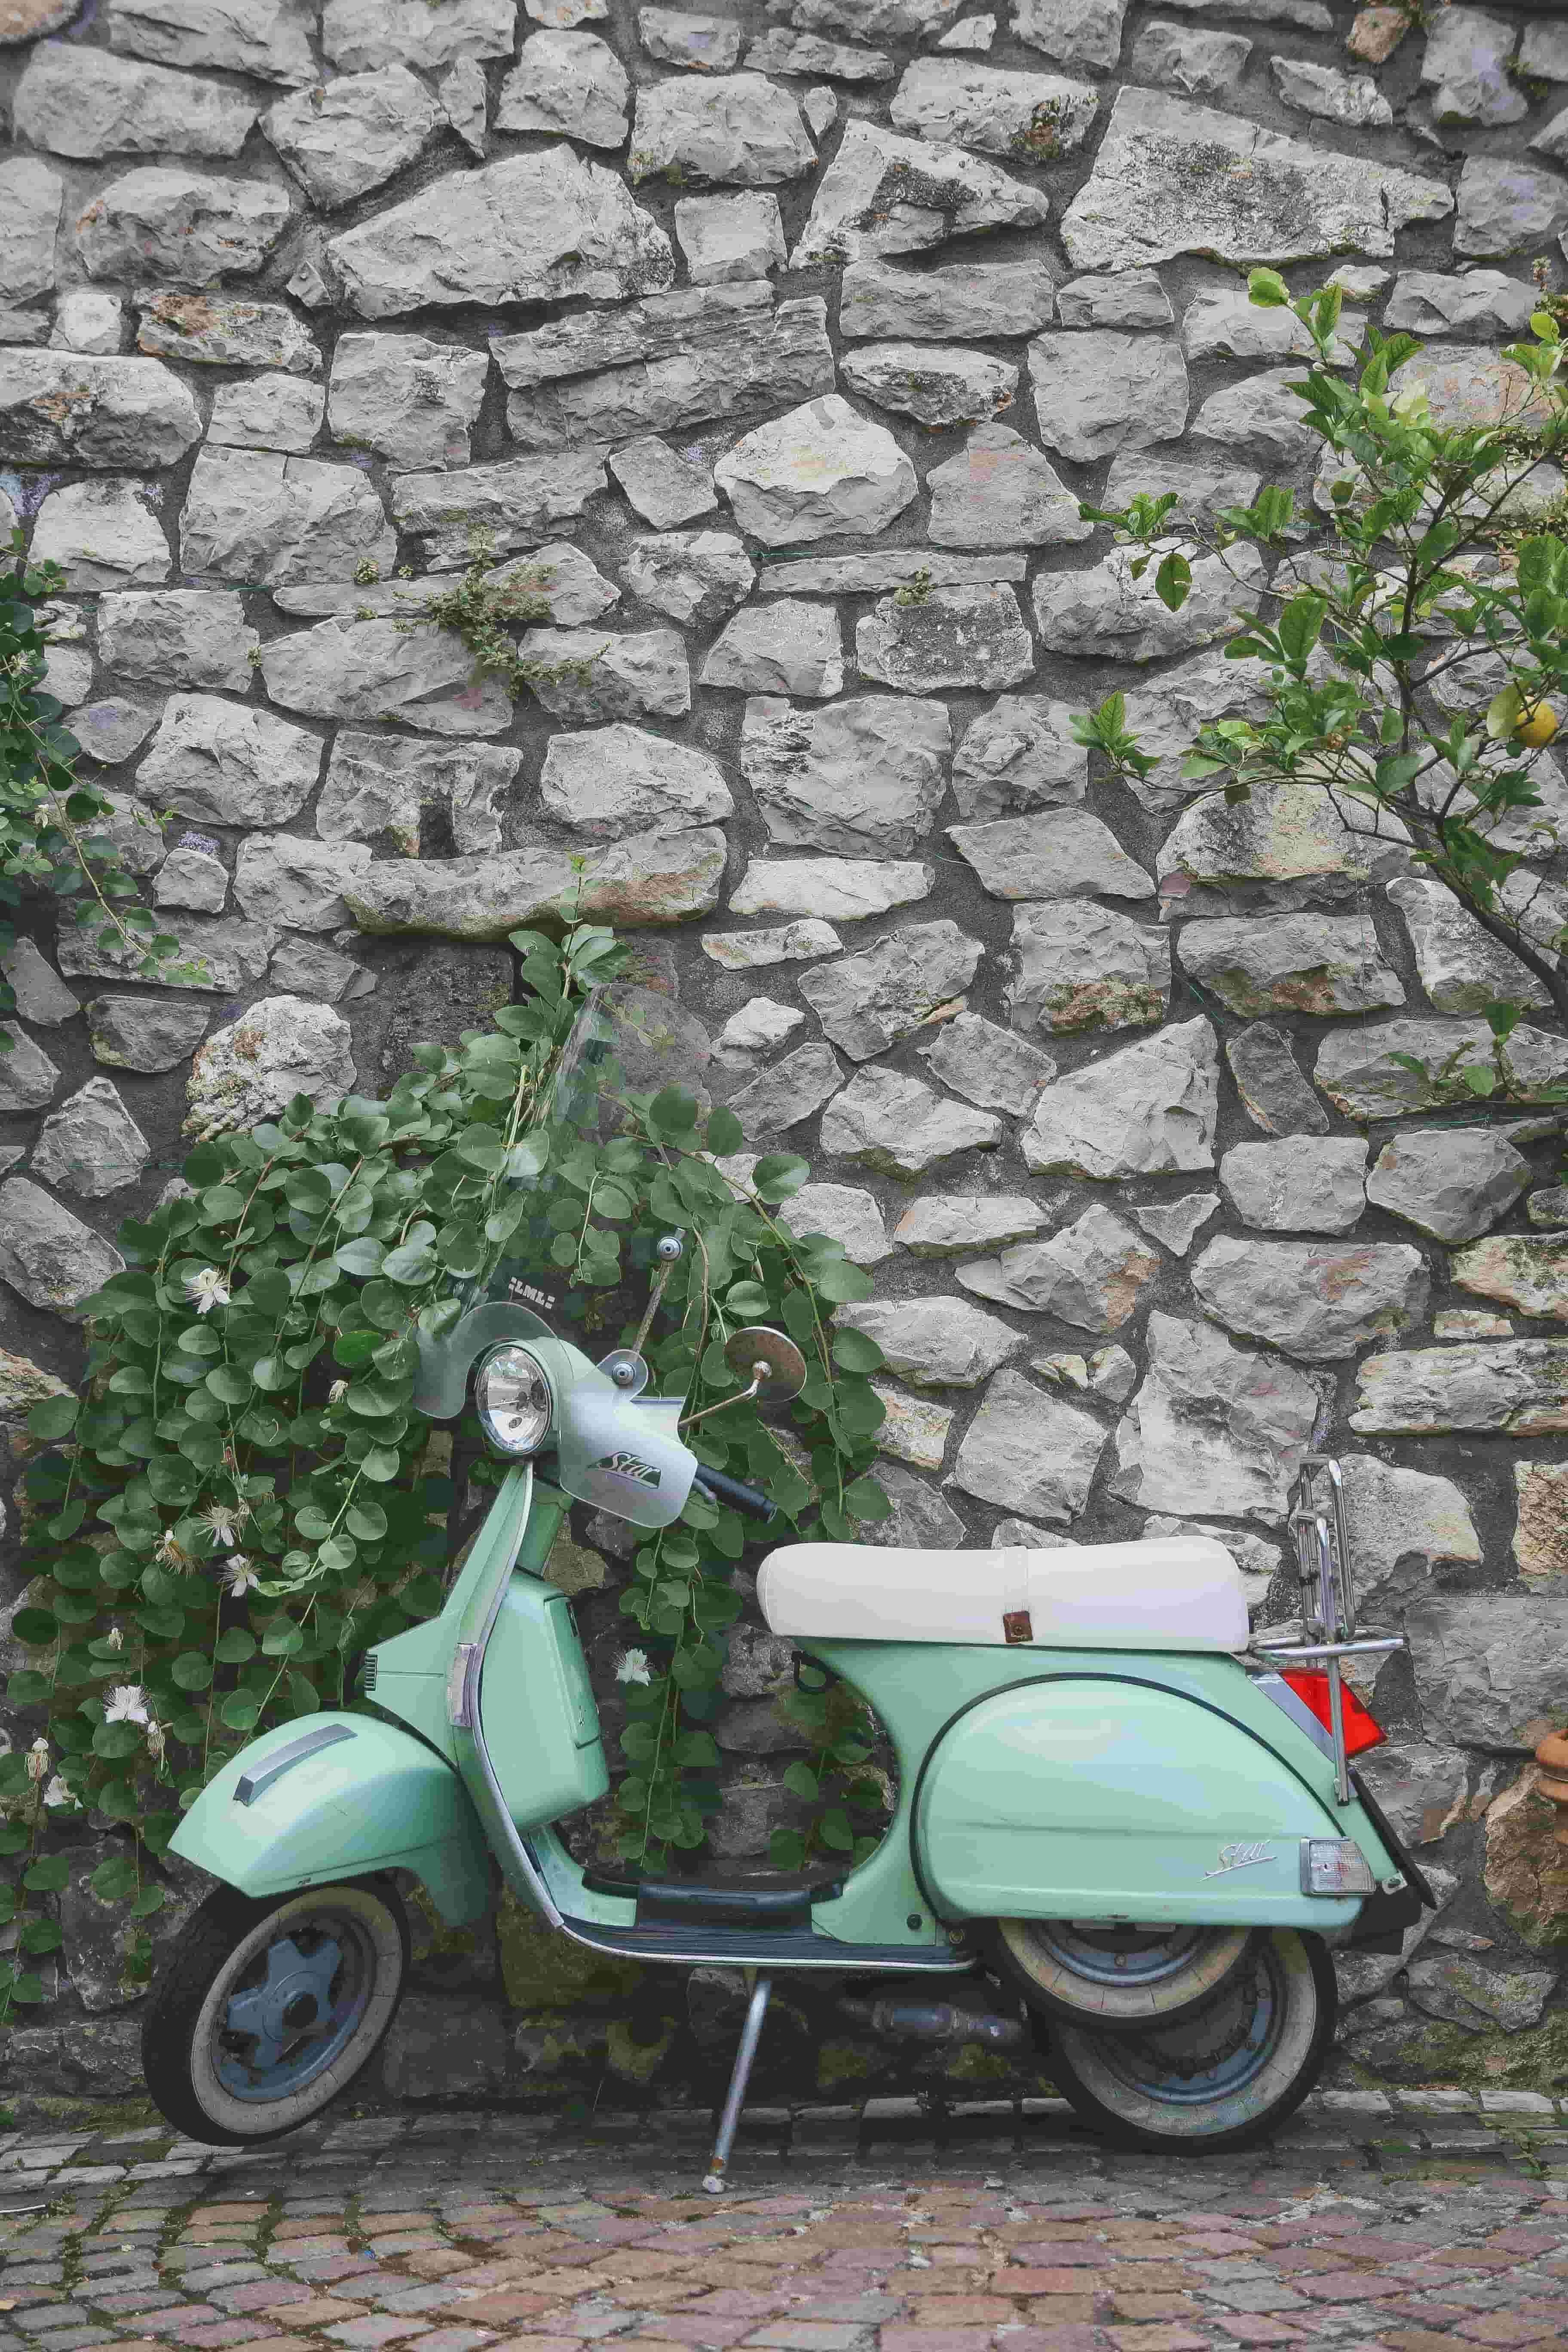 One of the best things to do in Positano is renting a scooter